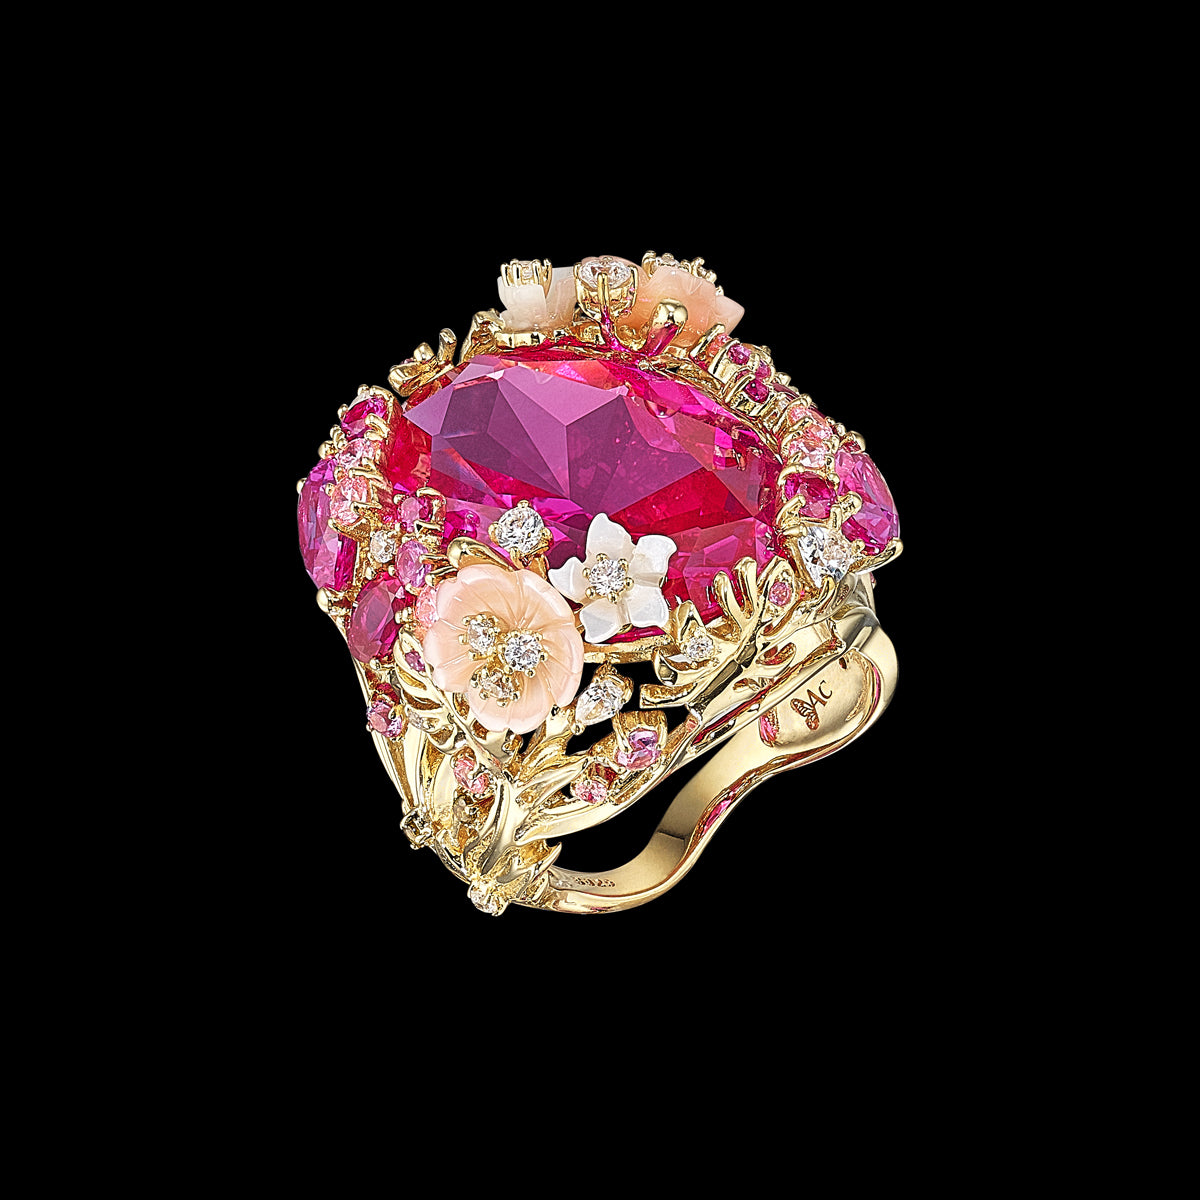 Fuchsia Paradise Ring, Ring, Anabela Chan Joaillerie - Fine jewelry with laboratory grown and created gemstones hand-crafted in the United Kingdom. Anabela Chan Joaillerie is the first fine jewellery brand in the world to champion laboratory-grown and created gemstones with high jewellery design, artisanal craftsmanship and a focus on ethical and sustainable innovations.